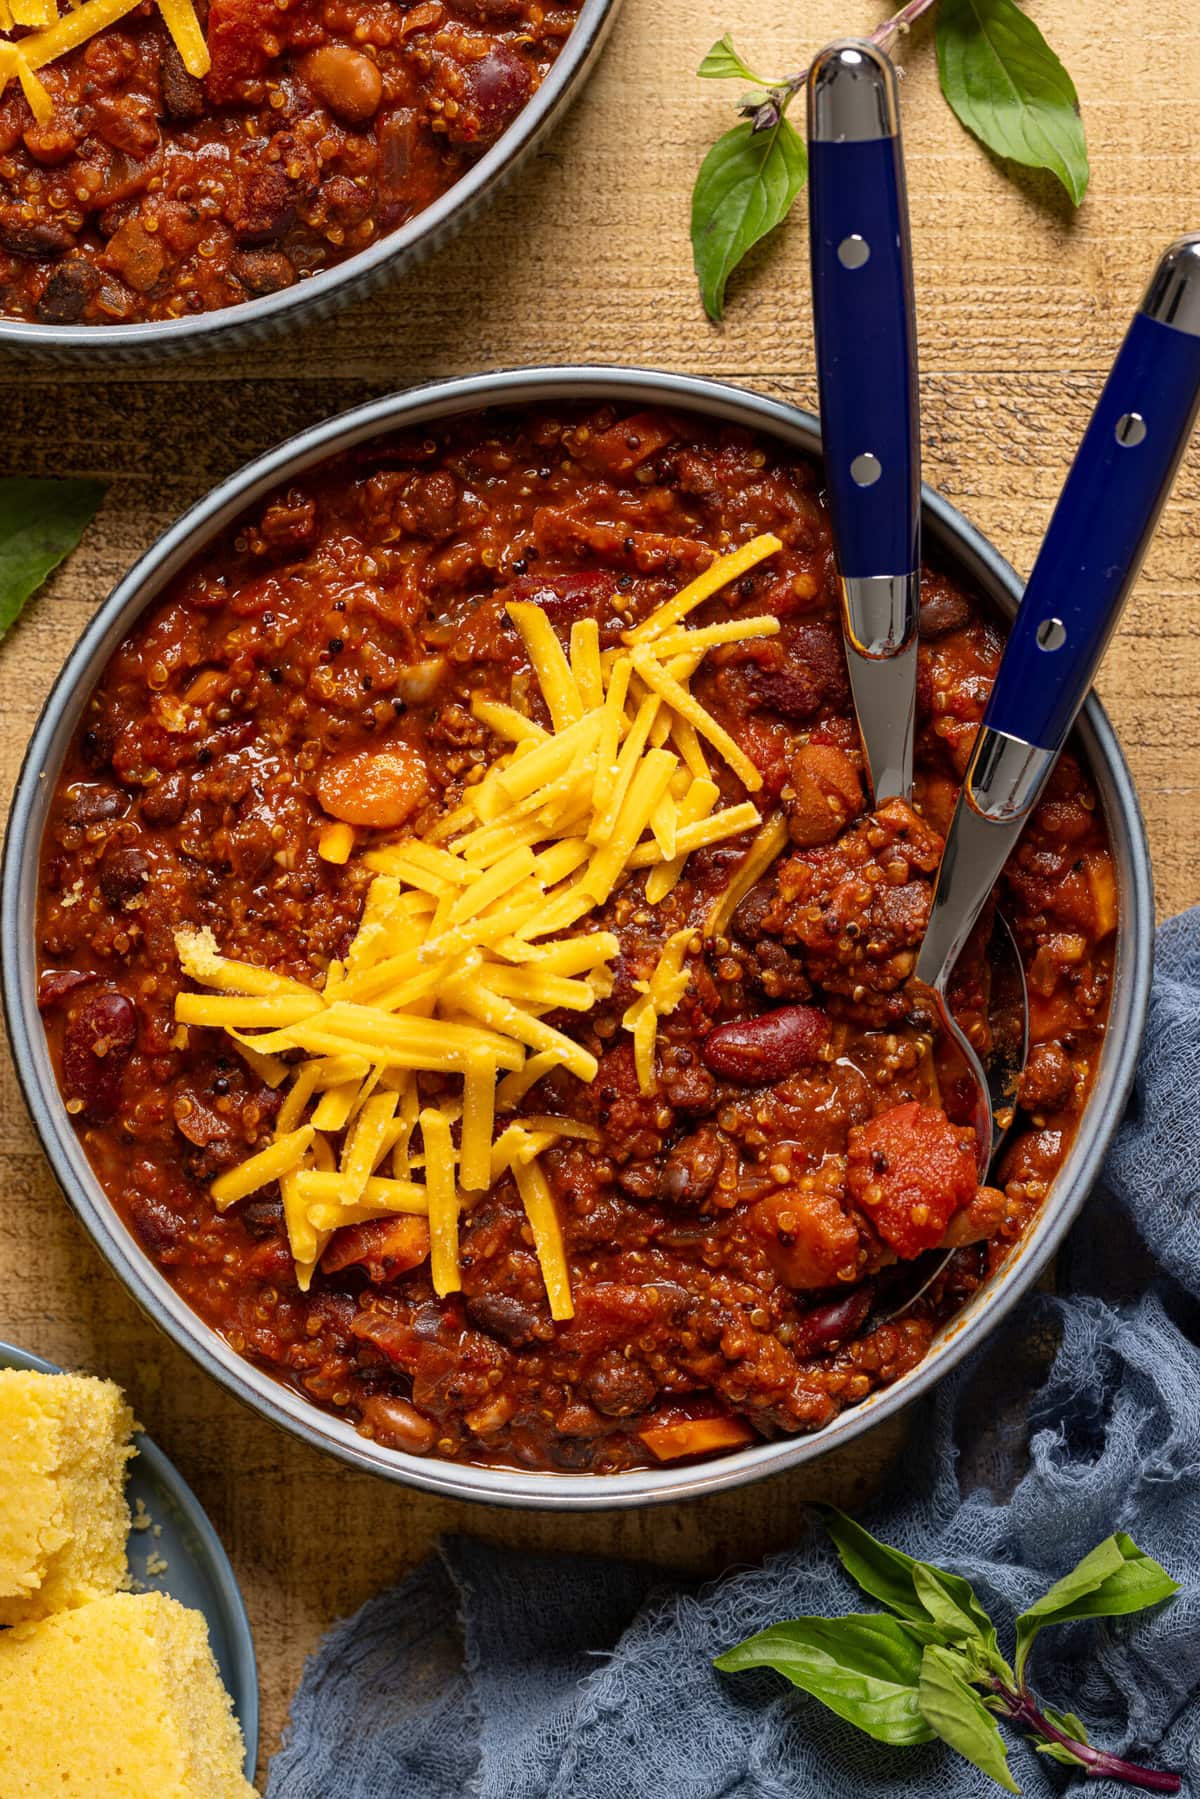 Bowl of chili recipe with two spoons.